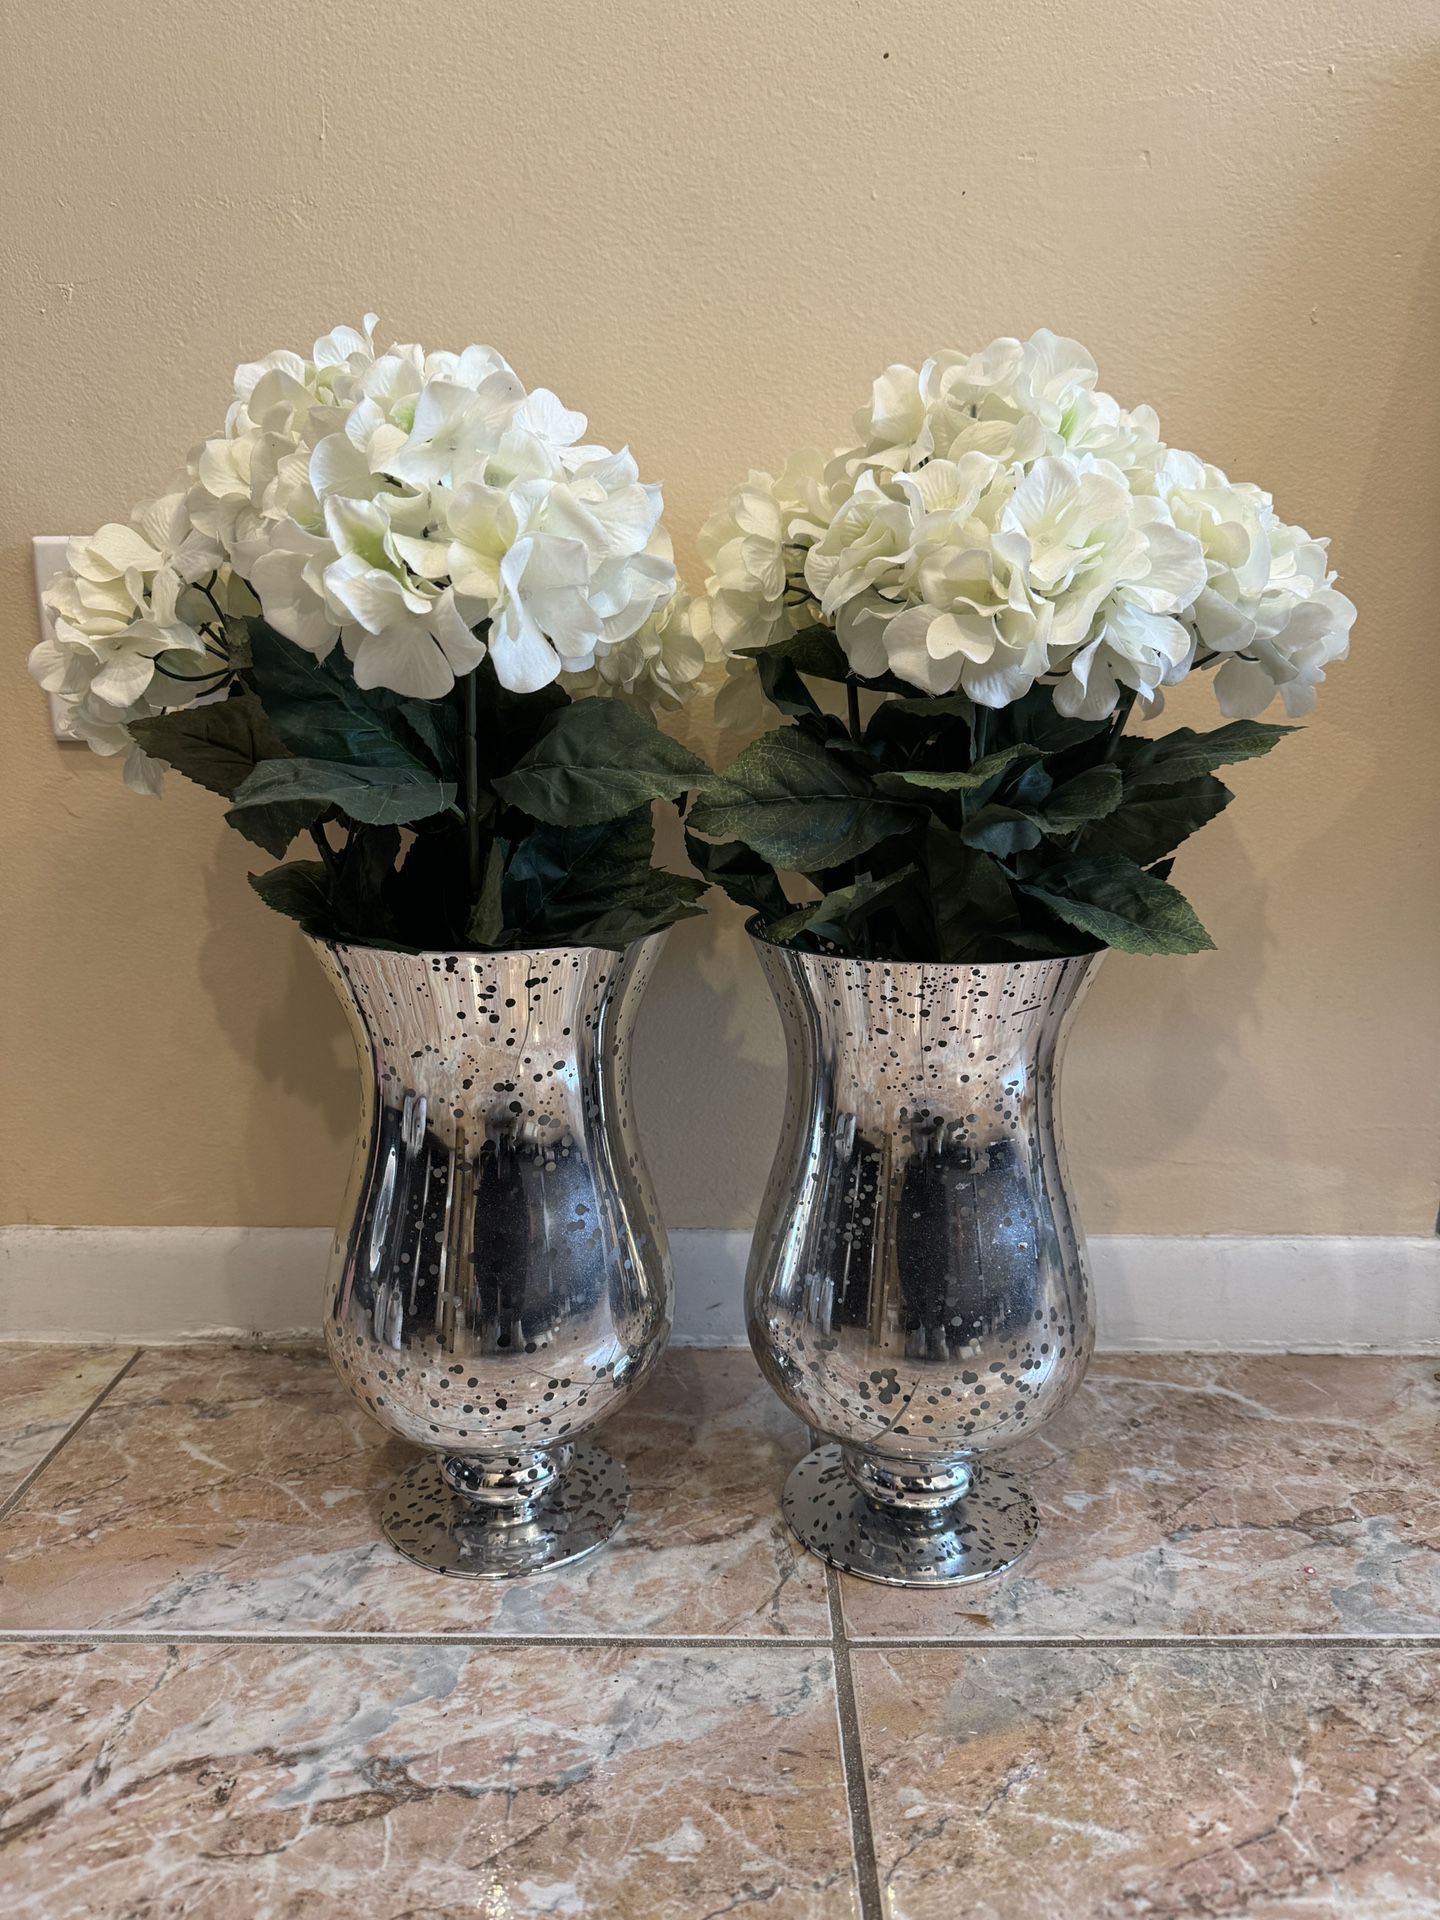 Vases with Faux Flowers 